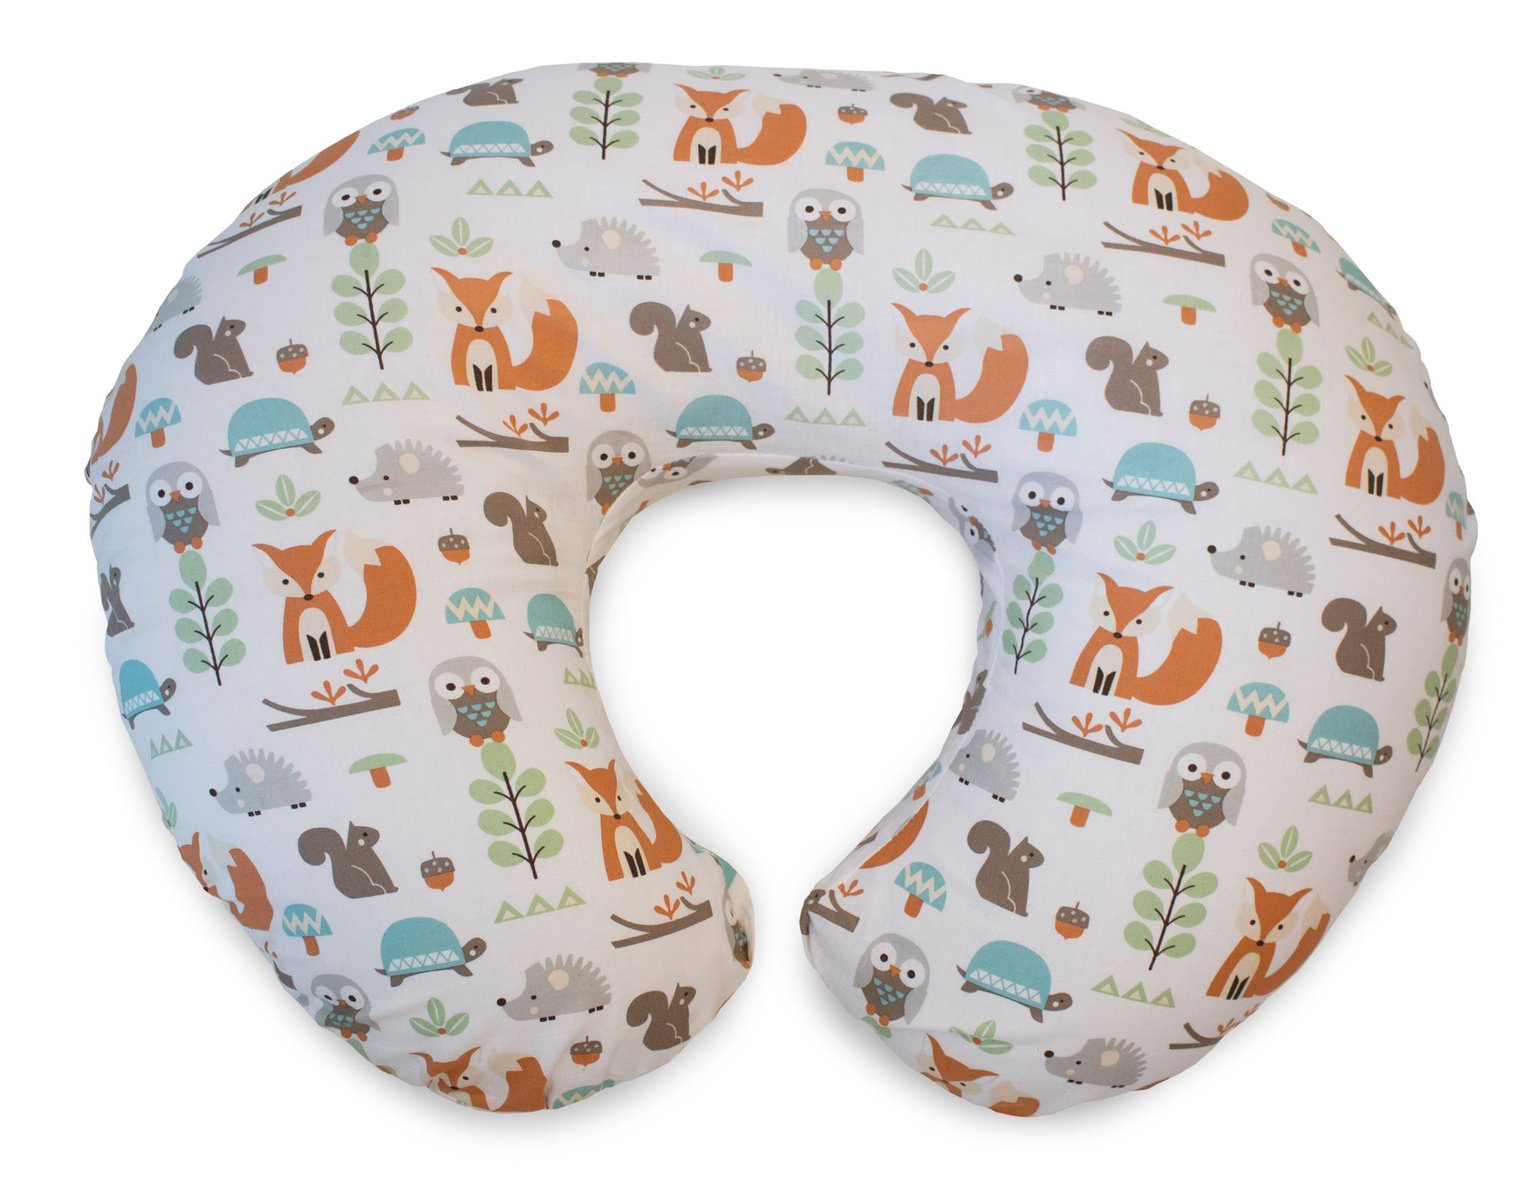 Chicco Boppy Pregnancy and Baby Nursing Pillow Review